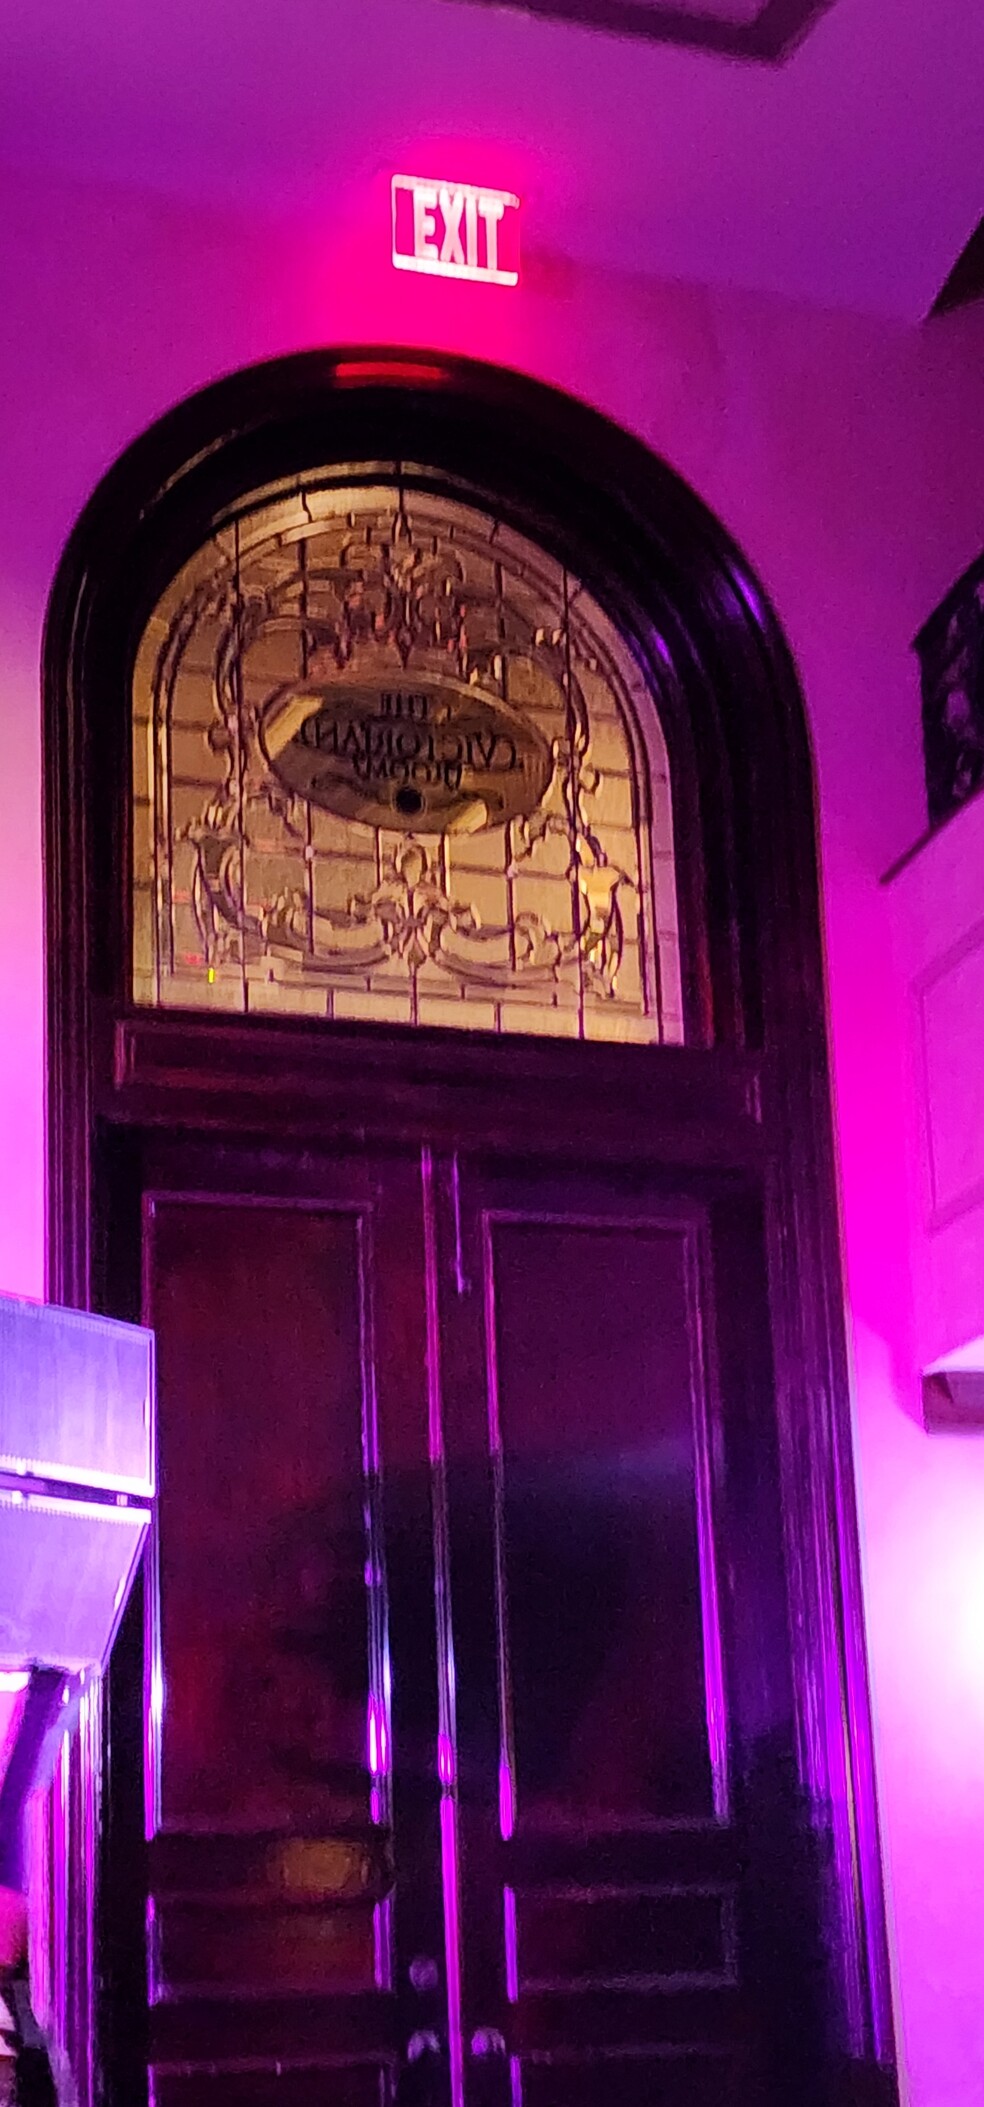 The ornate clear glass window at the top of the wooden door which is labeled The Victorian Room. 